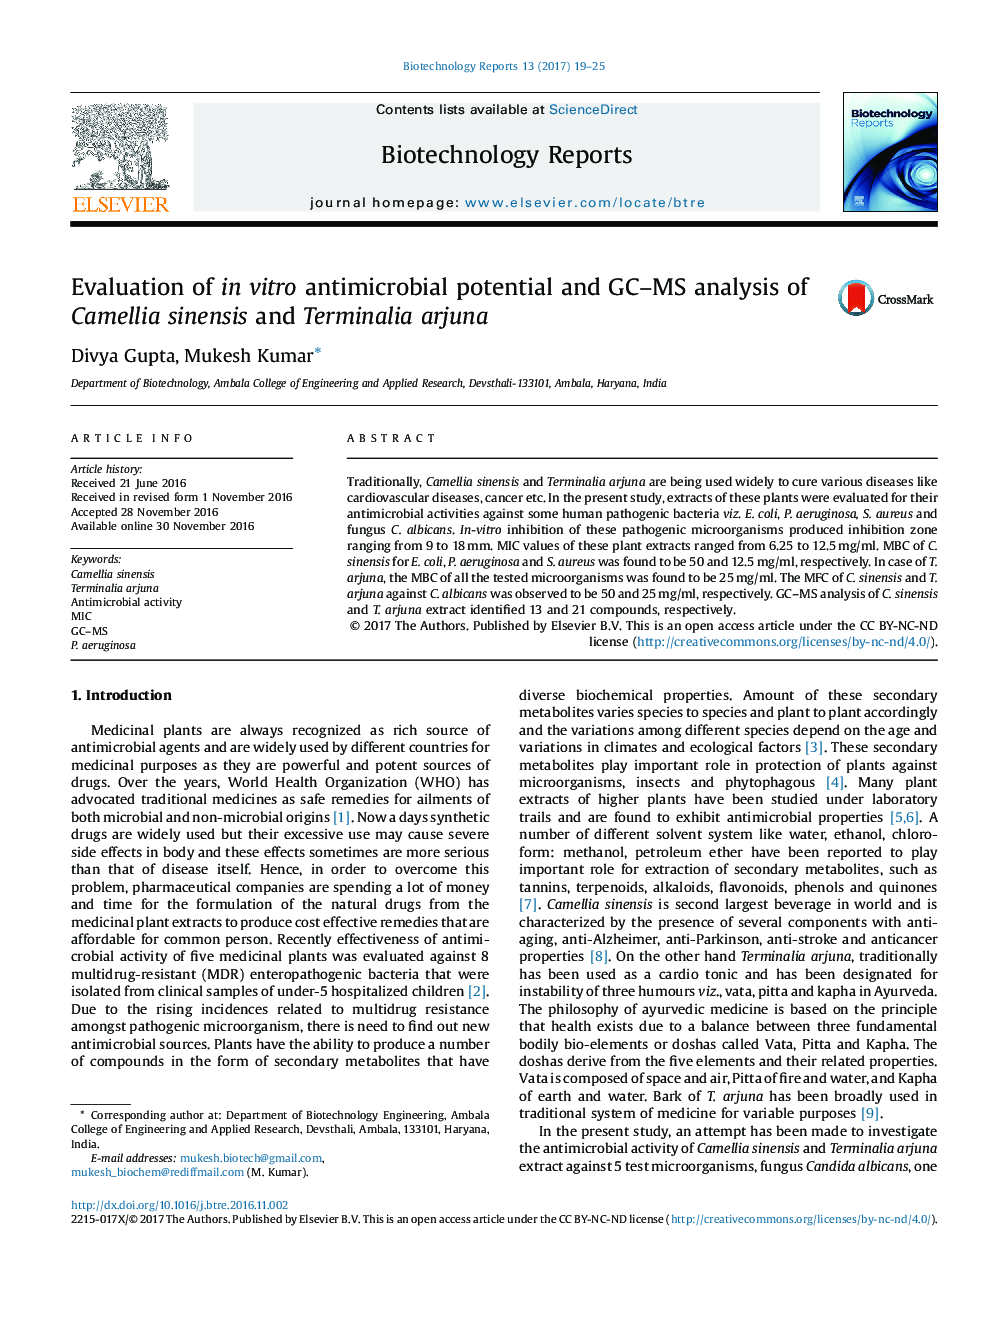 Evaluation of in vitro antimicrobial potential and GC-MS analysis of Camellia sinensis and Terminalia arjuna